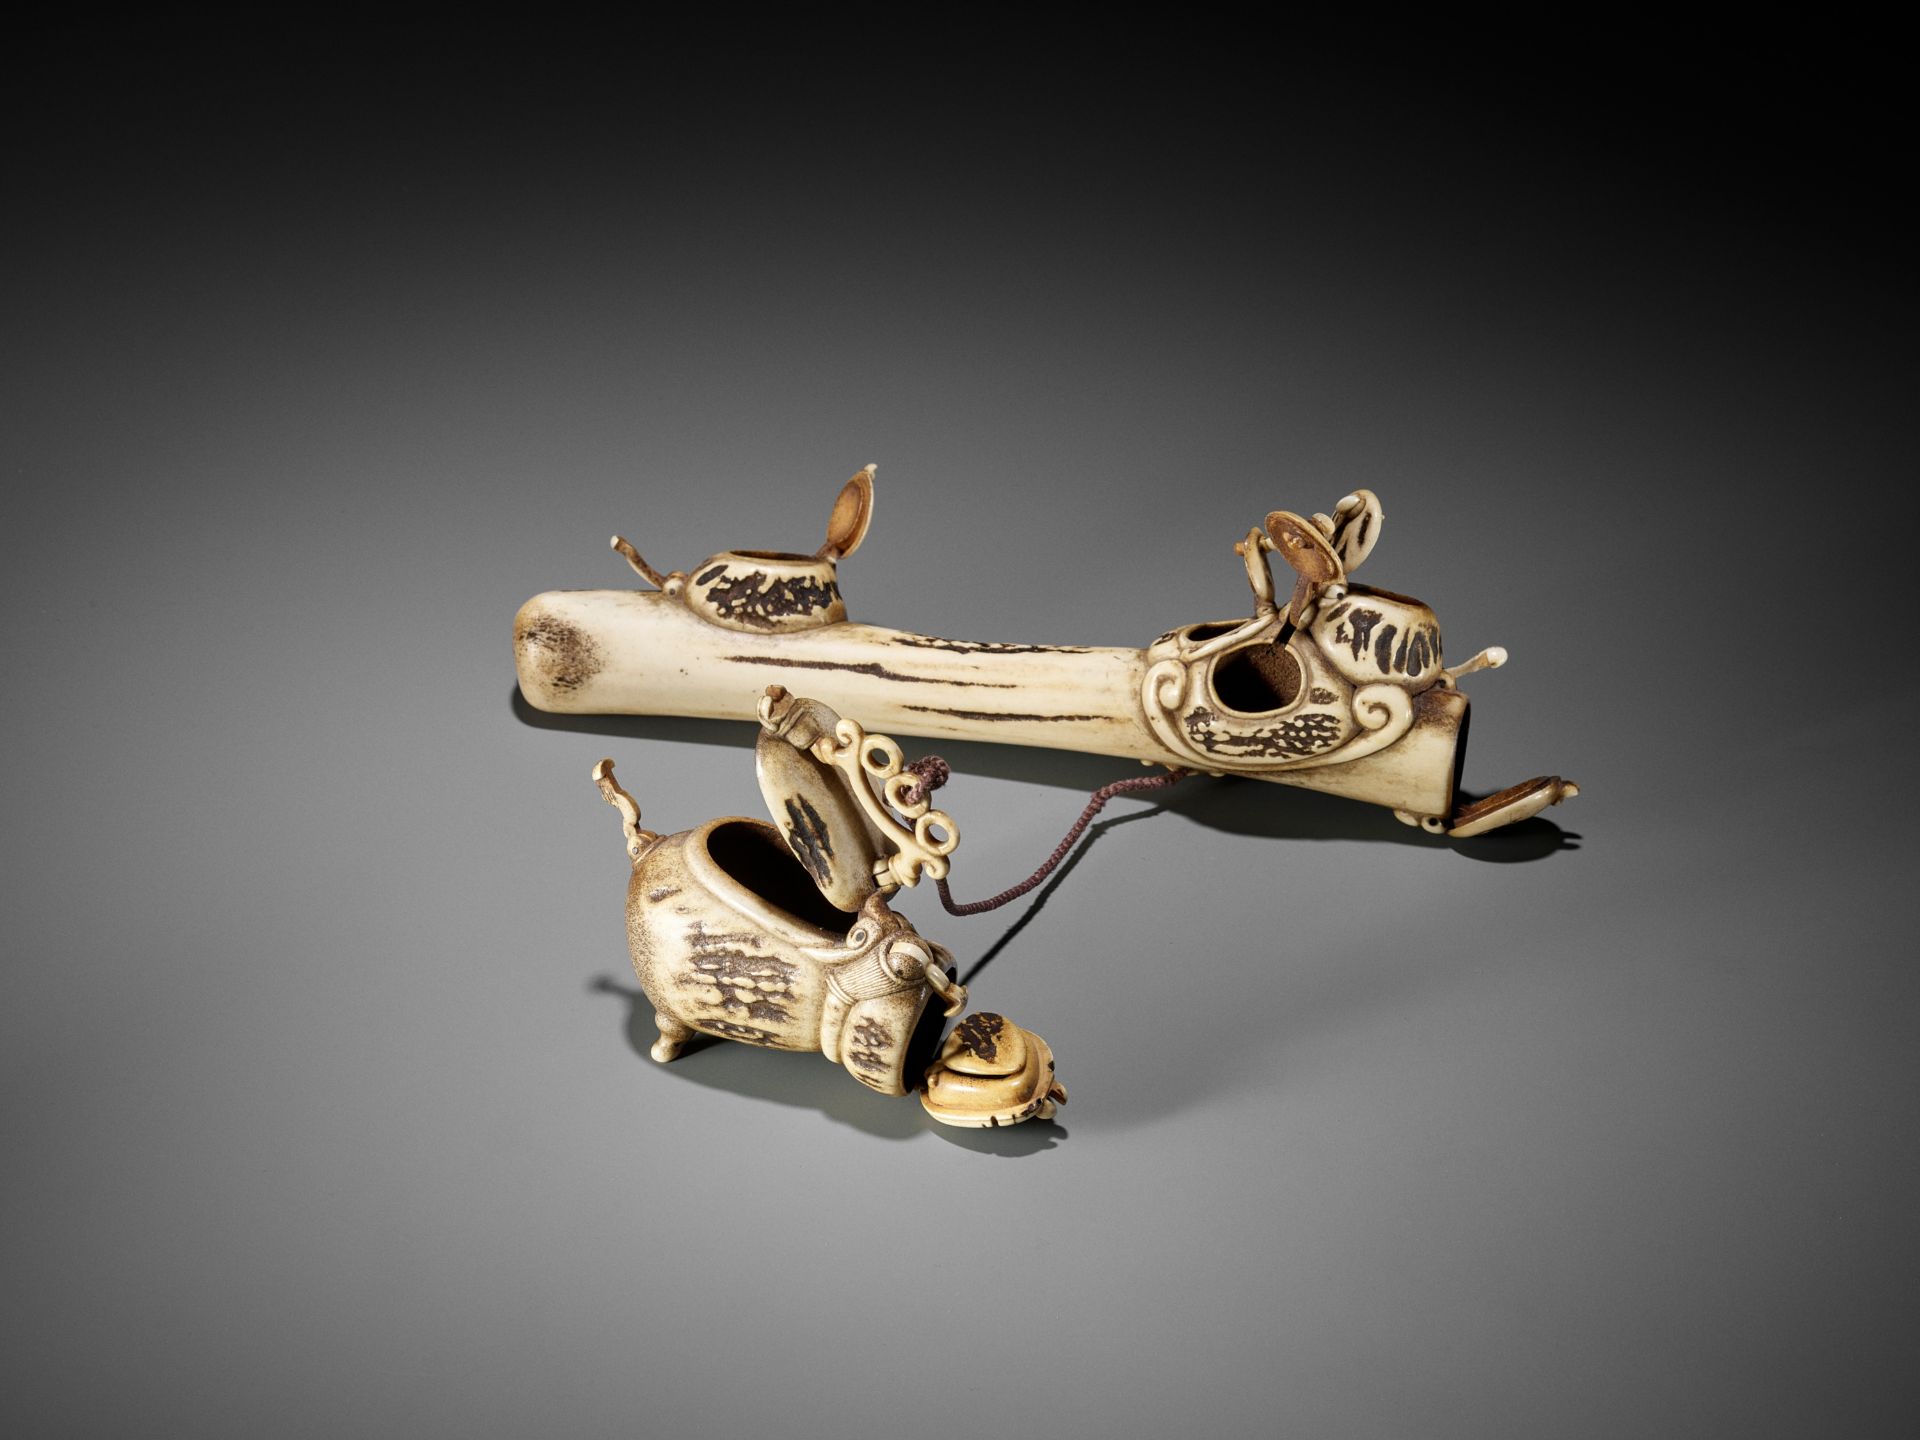 A LARGE AND RARE STAG ANTLER YATATE (PORTABLE WRITING SET) WITH TSUKUMOGAMI SUMITSUBO - Image 4 of 8